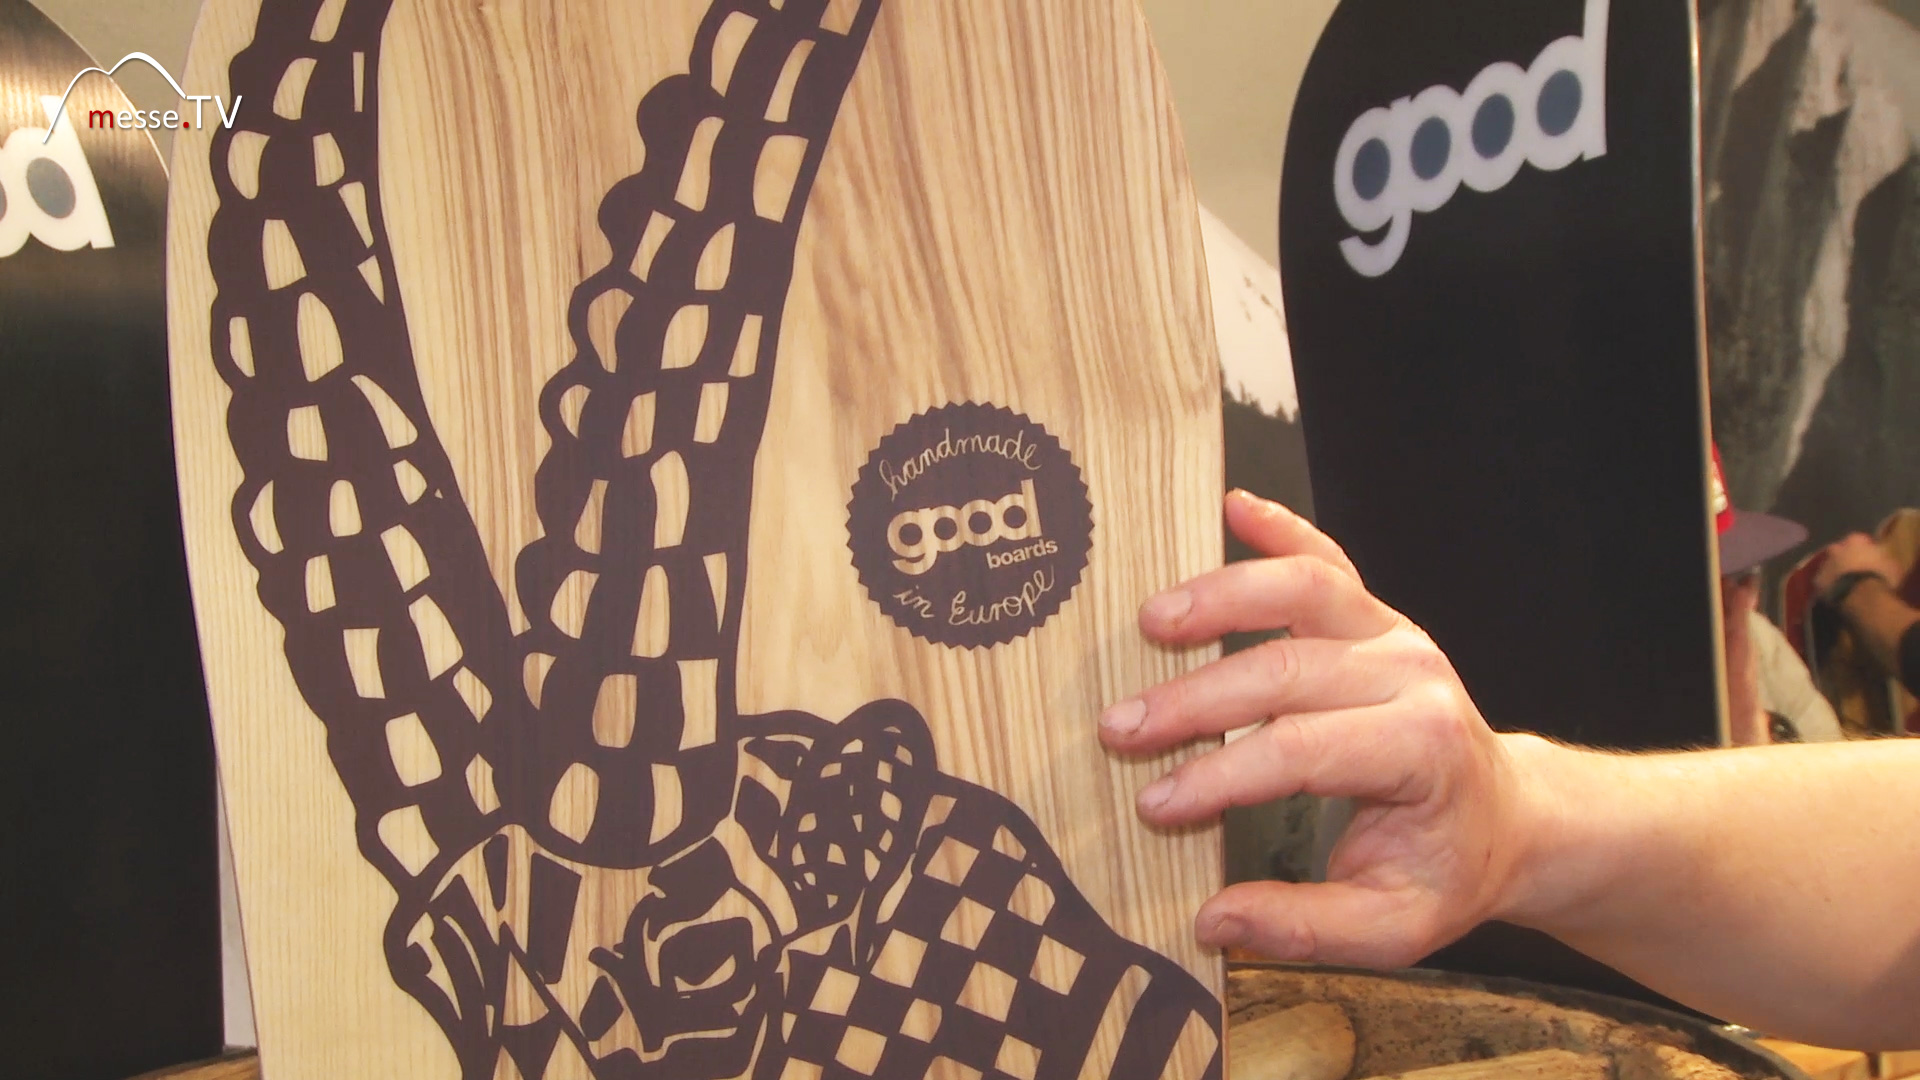 wooden snowboard with icorn motif good boards